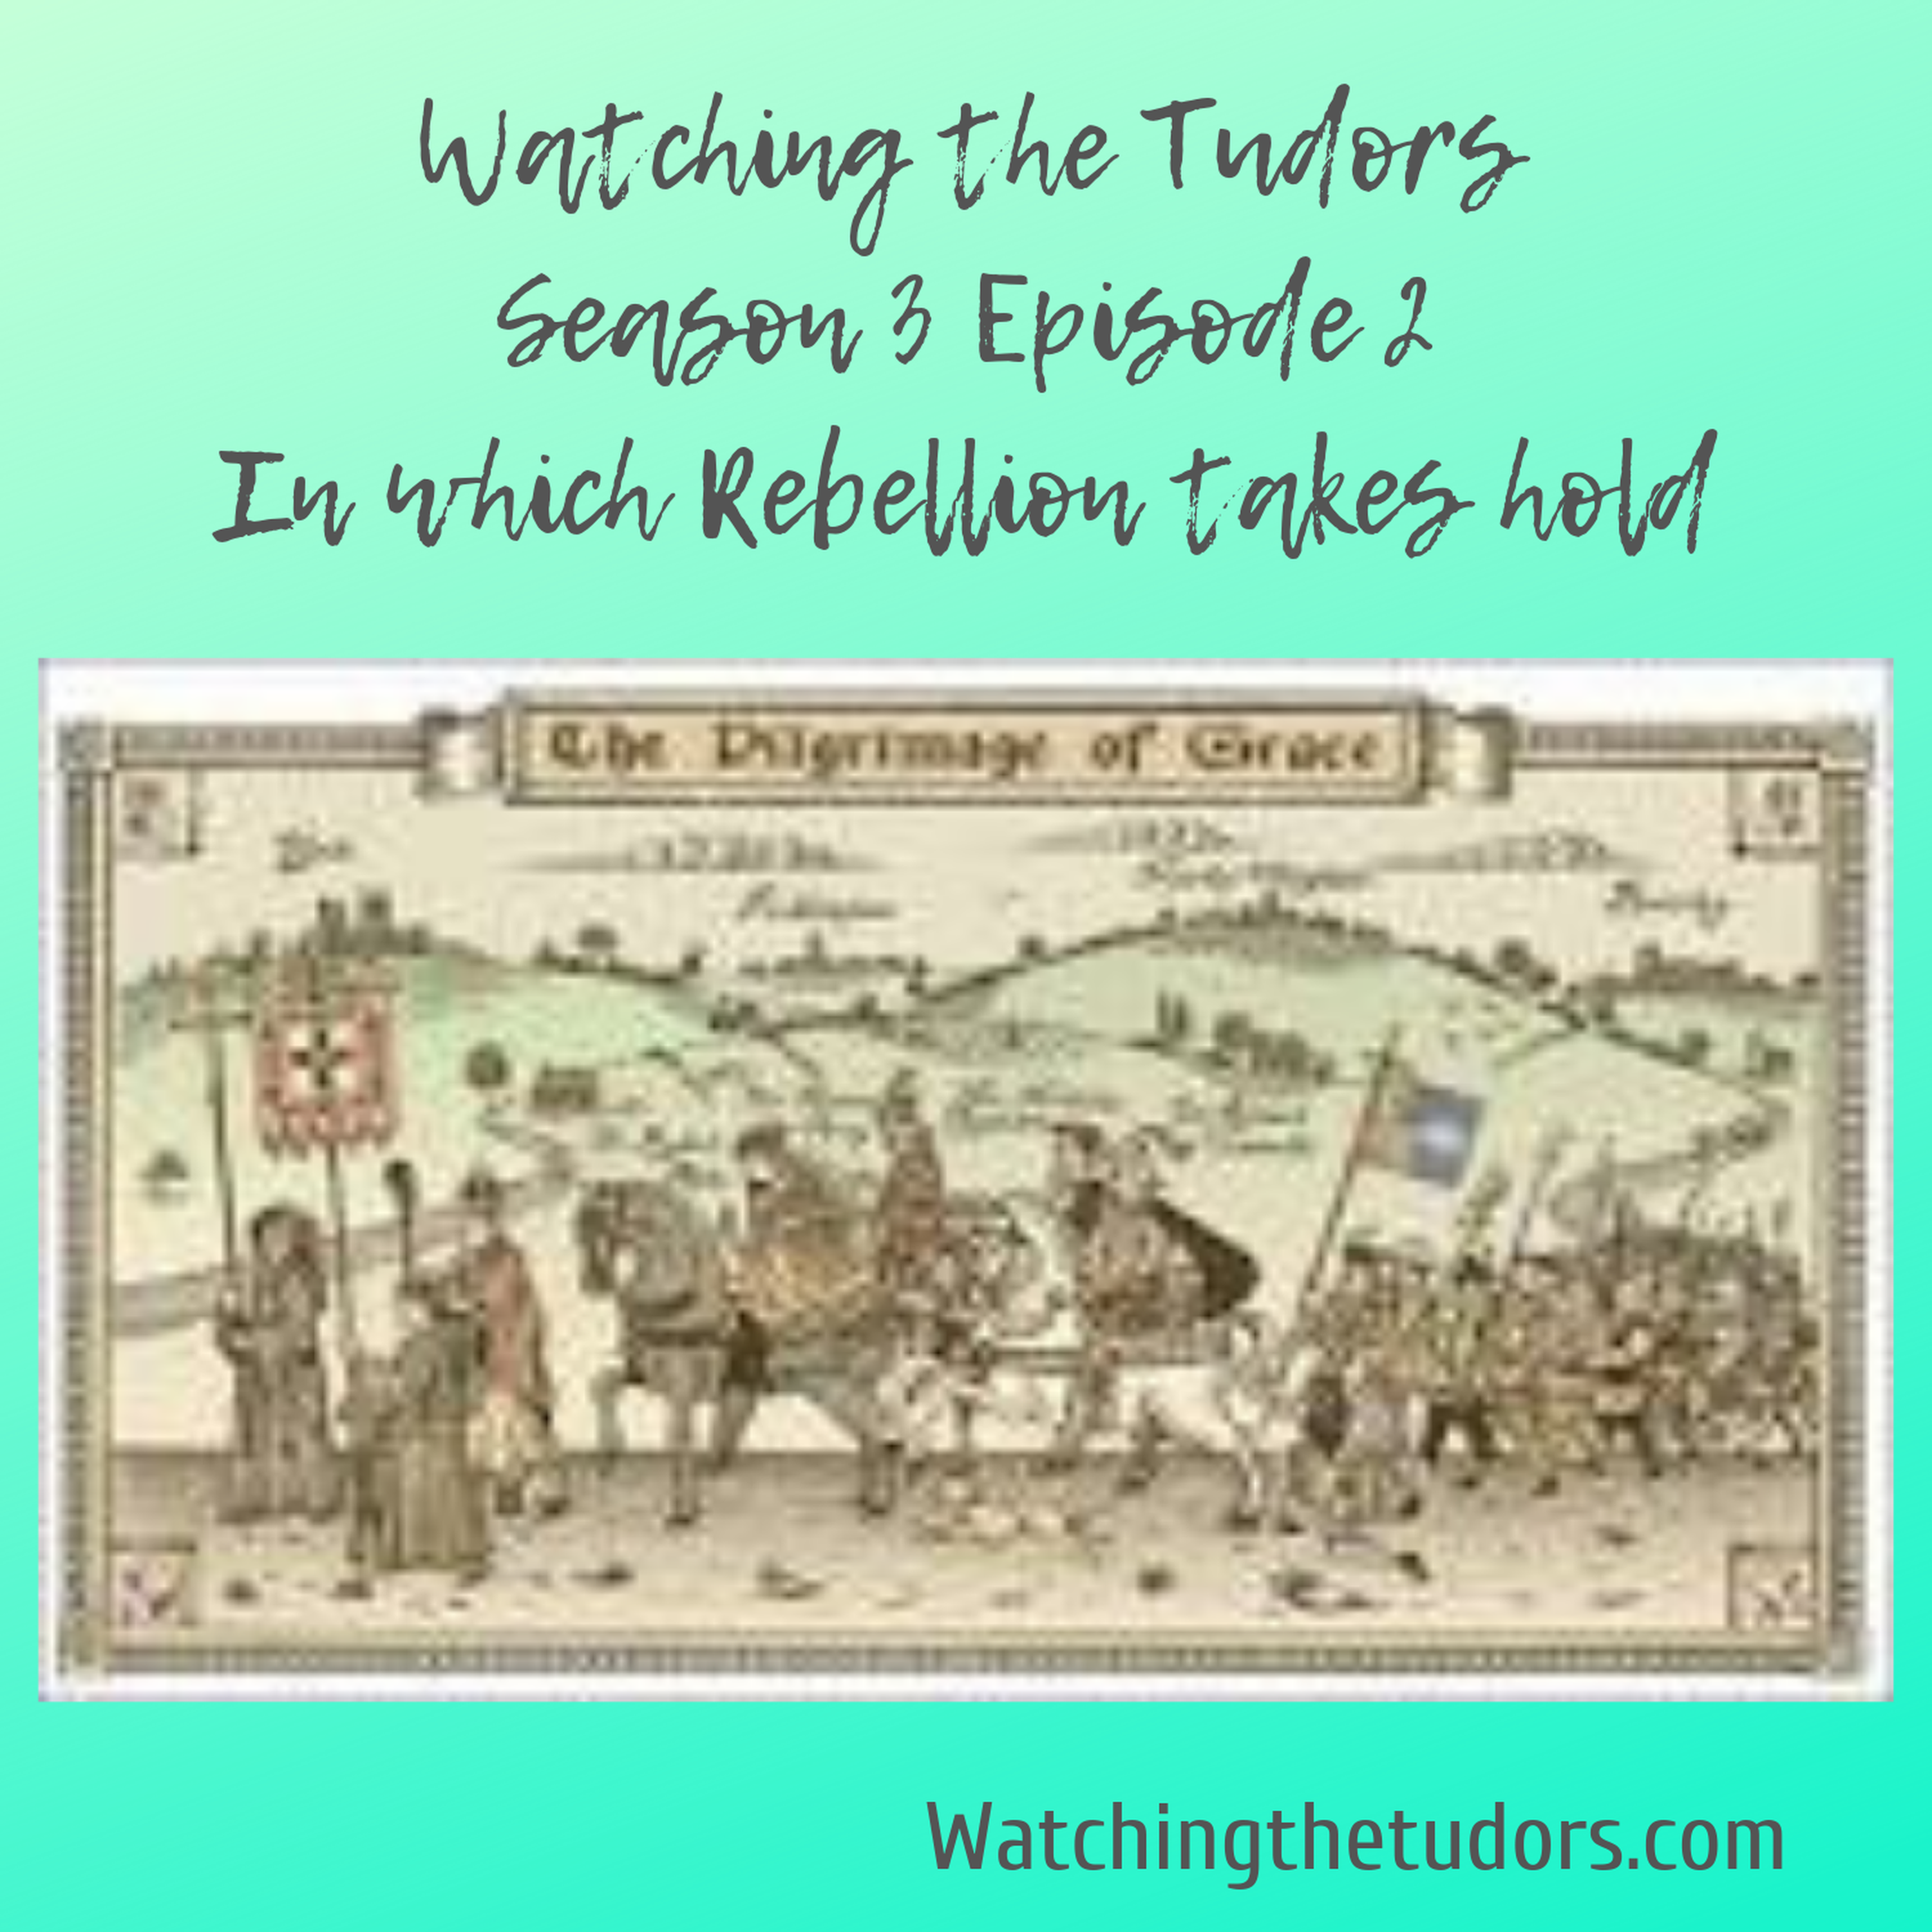 cover art for Watching the Tudors Season 3 Episode 2